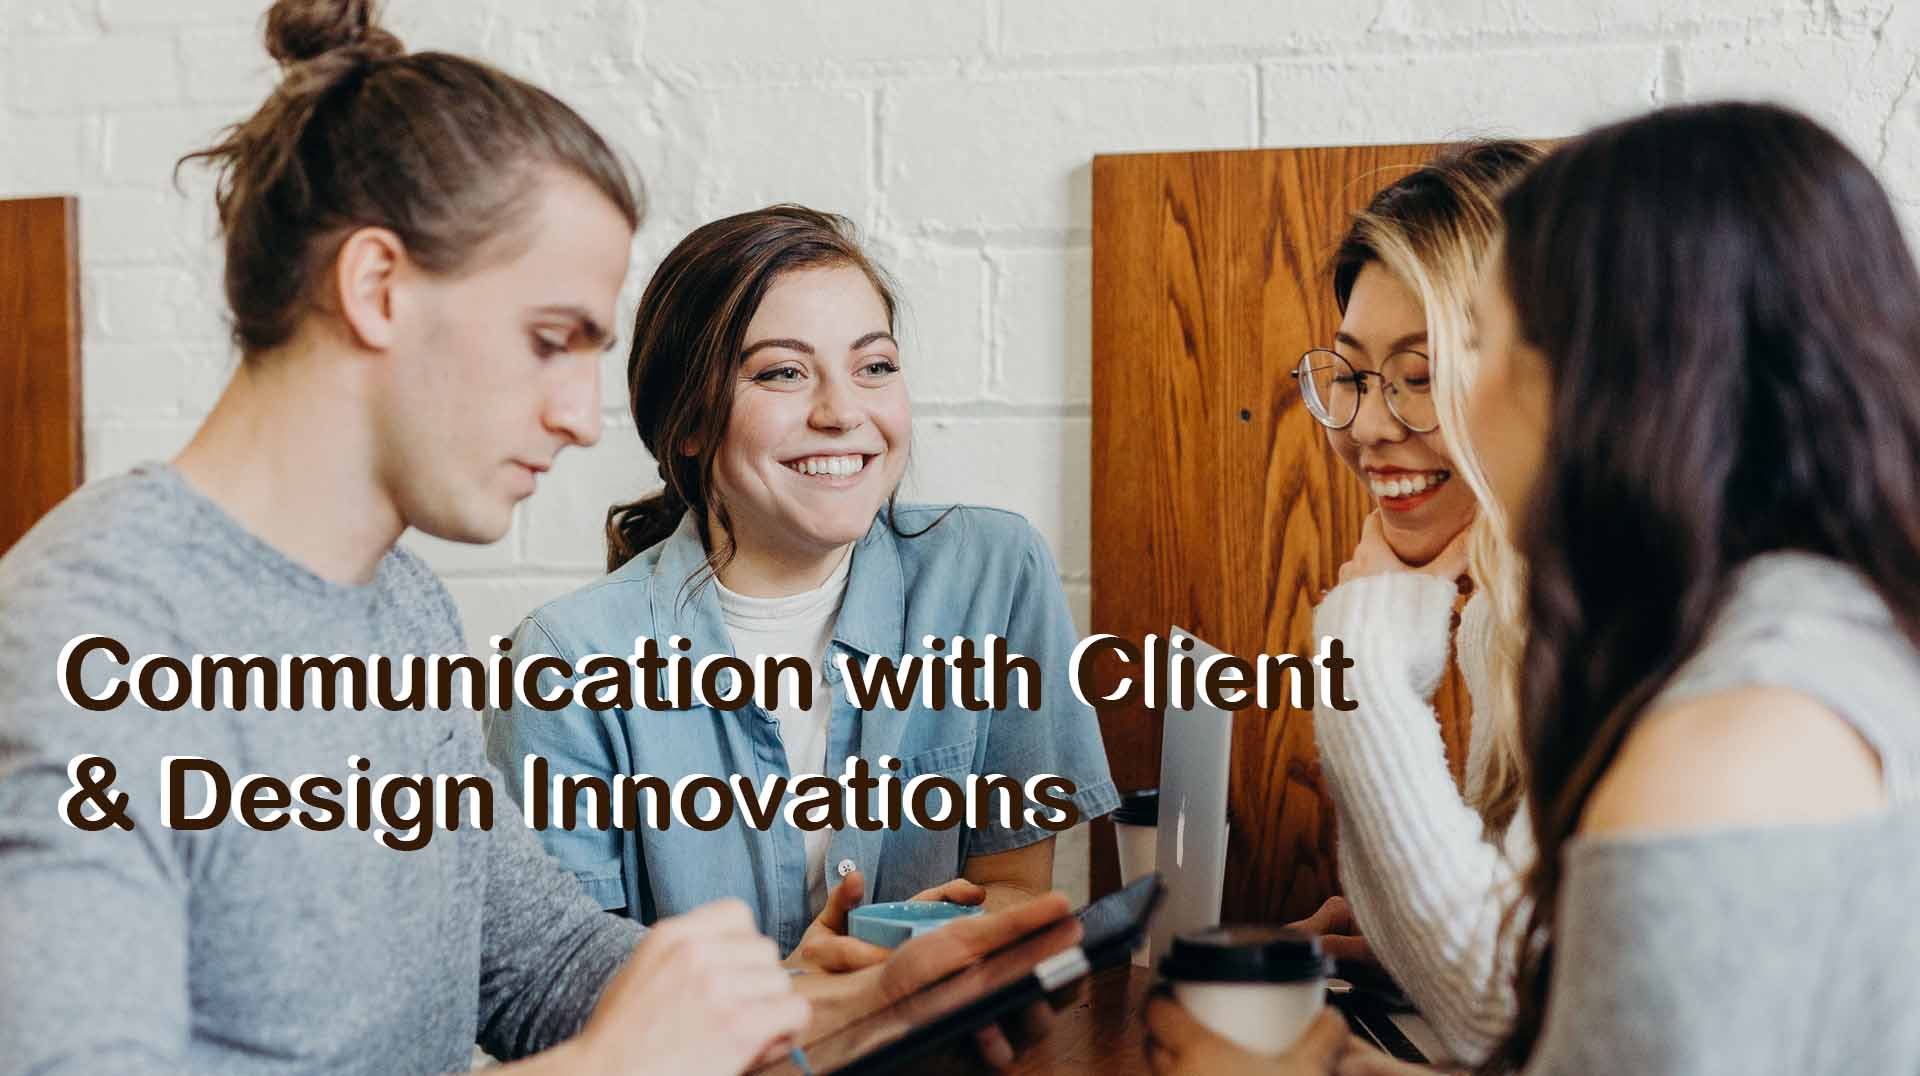 Communication-with-client-design-innovations-opt